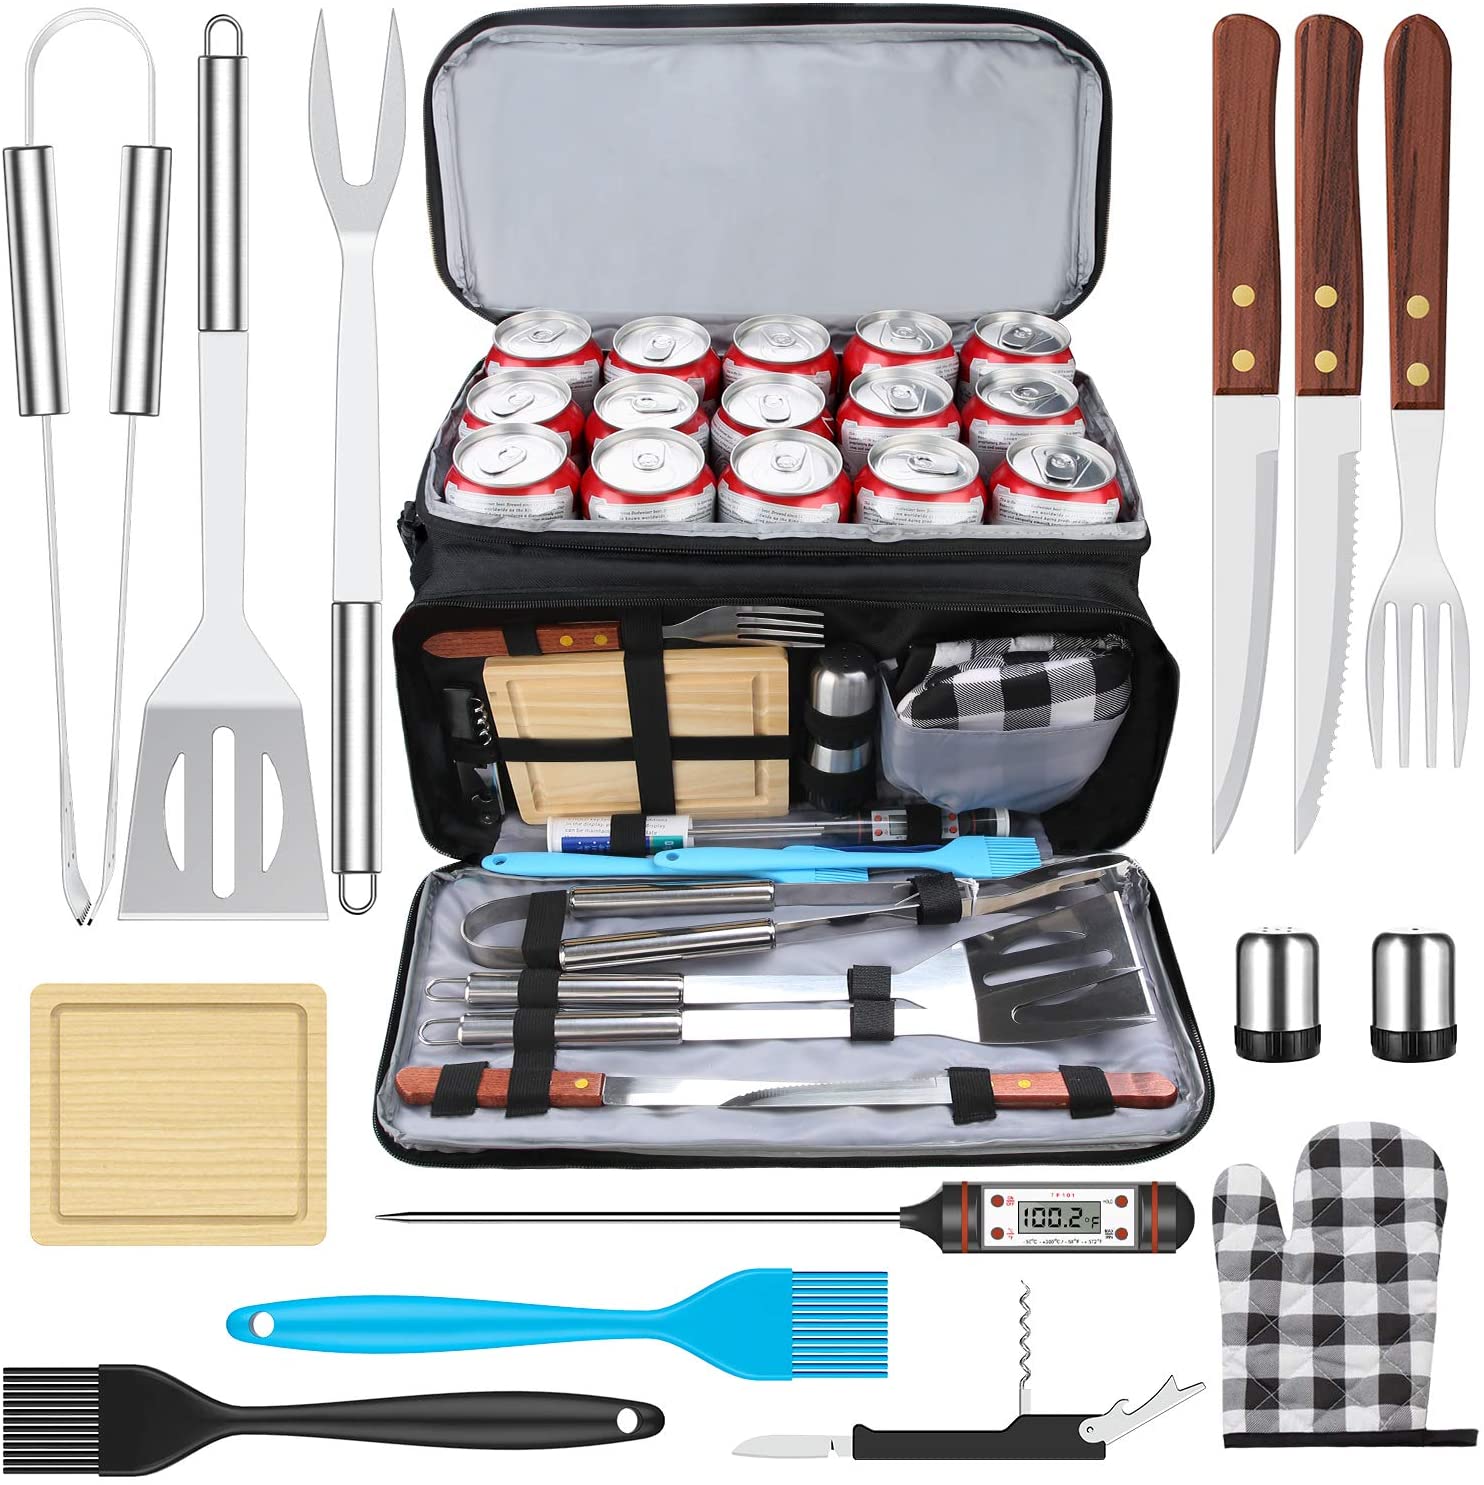 AISITIN BBQ Grill Accessories with Insulated Cooler Bag, Grill Utensils Set BBQ Grilling Accessories BBQ Tools Set, Stainless Steel Grill Set for Smoker, Camping, Kitchen Grill Tool Set for Men - image 1 of 9